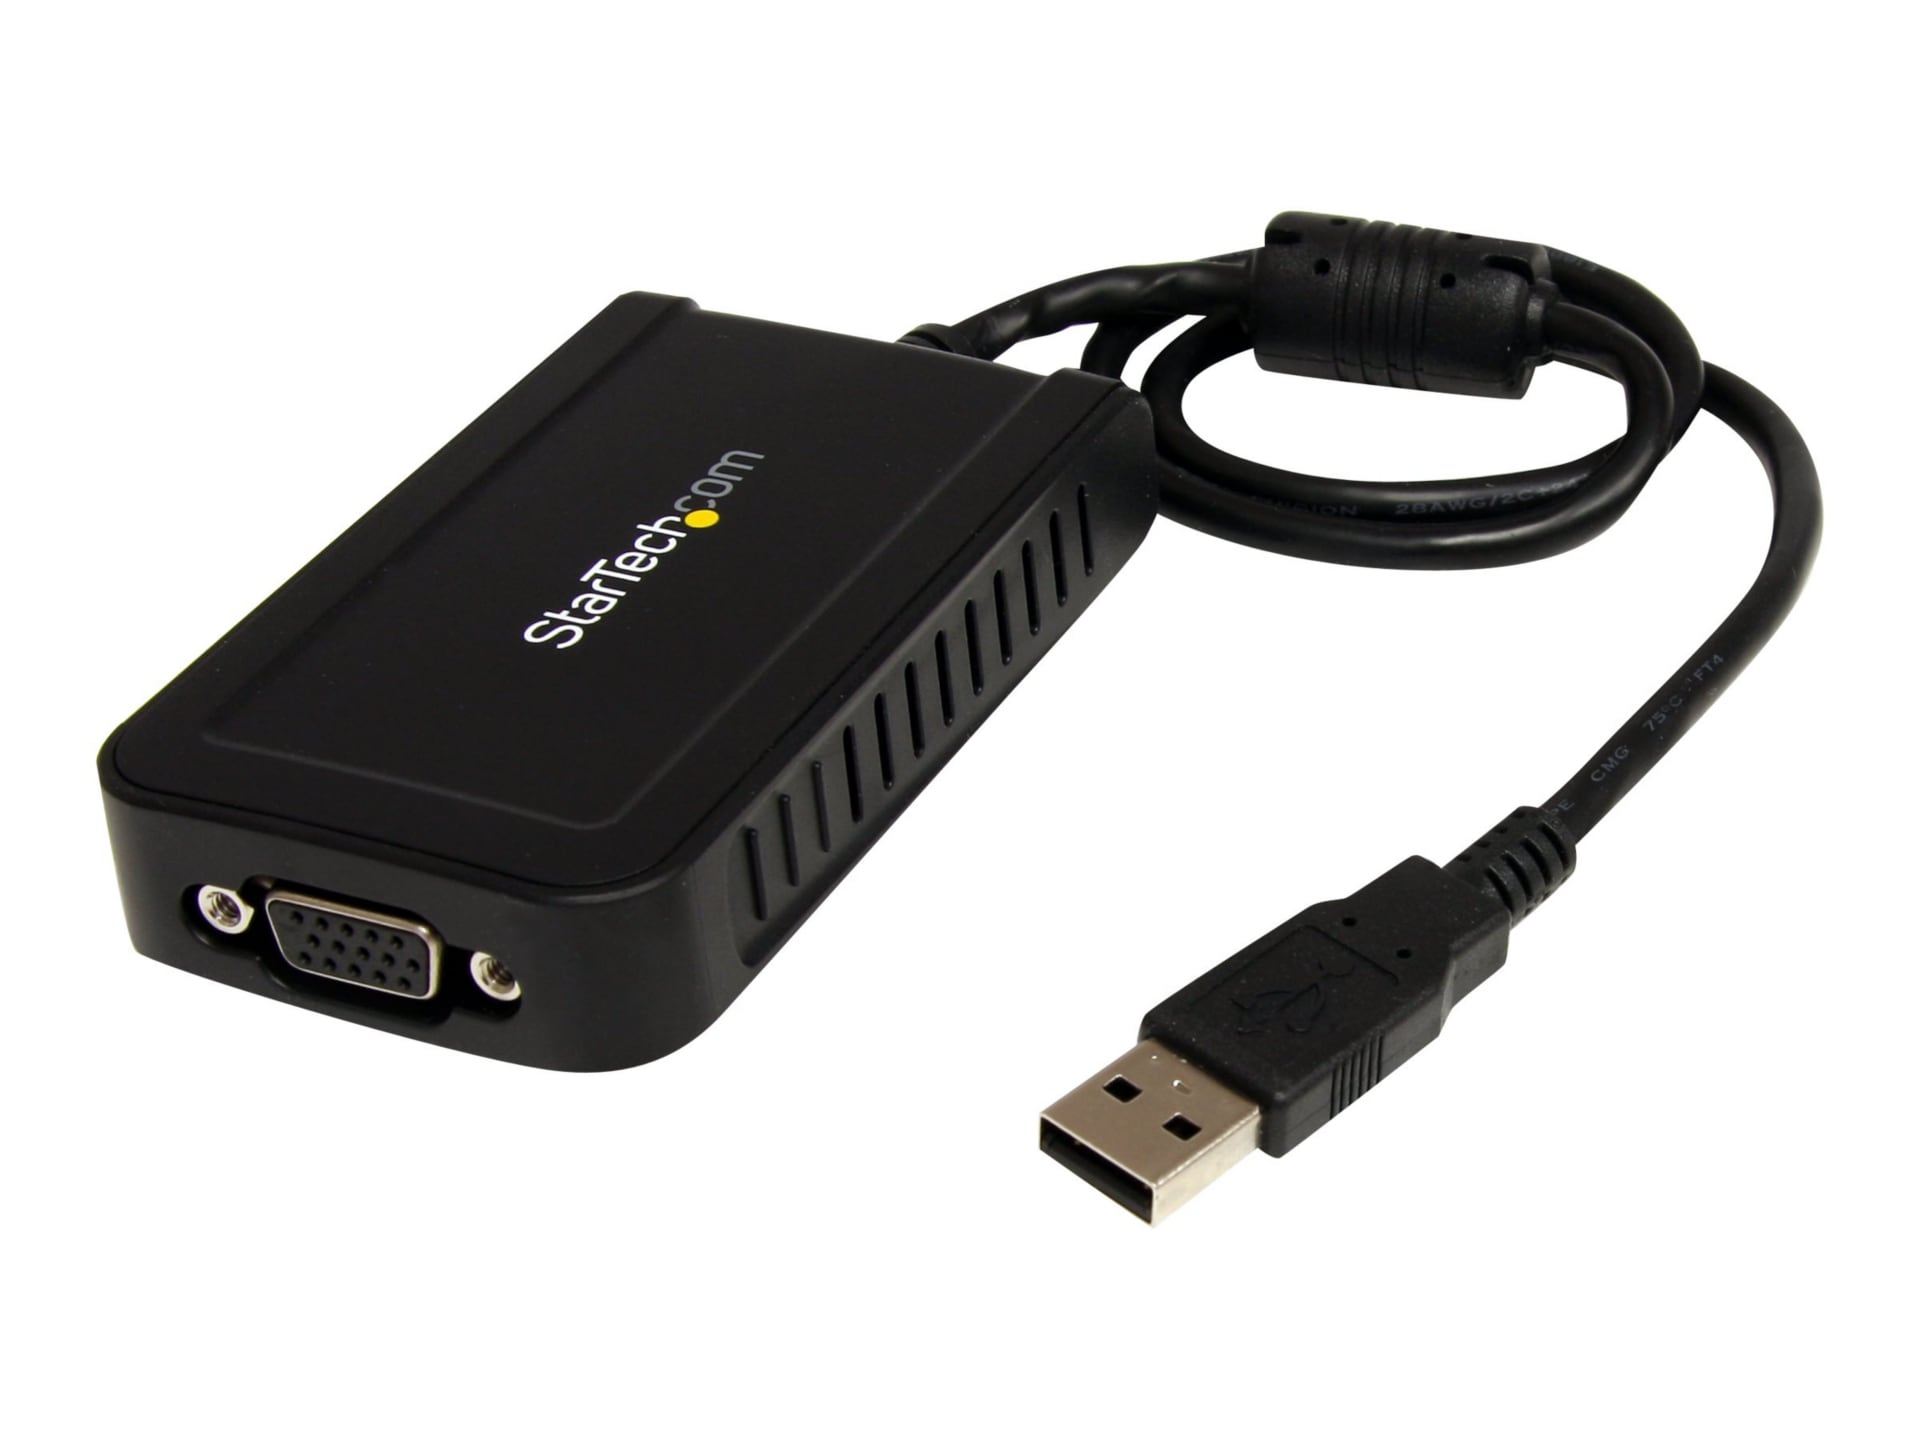 StarTech.com VGA Adapter Multi Monitor Graphics Video Card USB2VGAE3 - Monitor Cables & Adapters - CDW.com